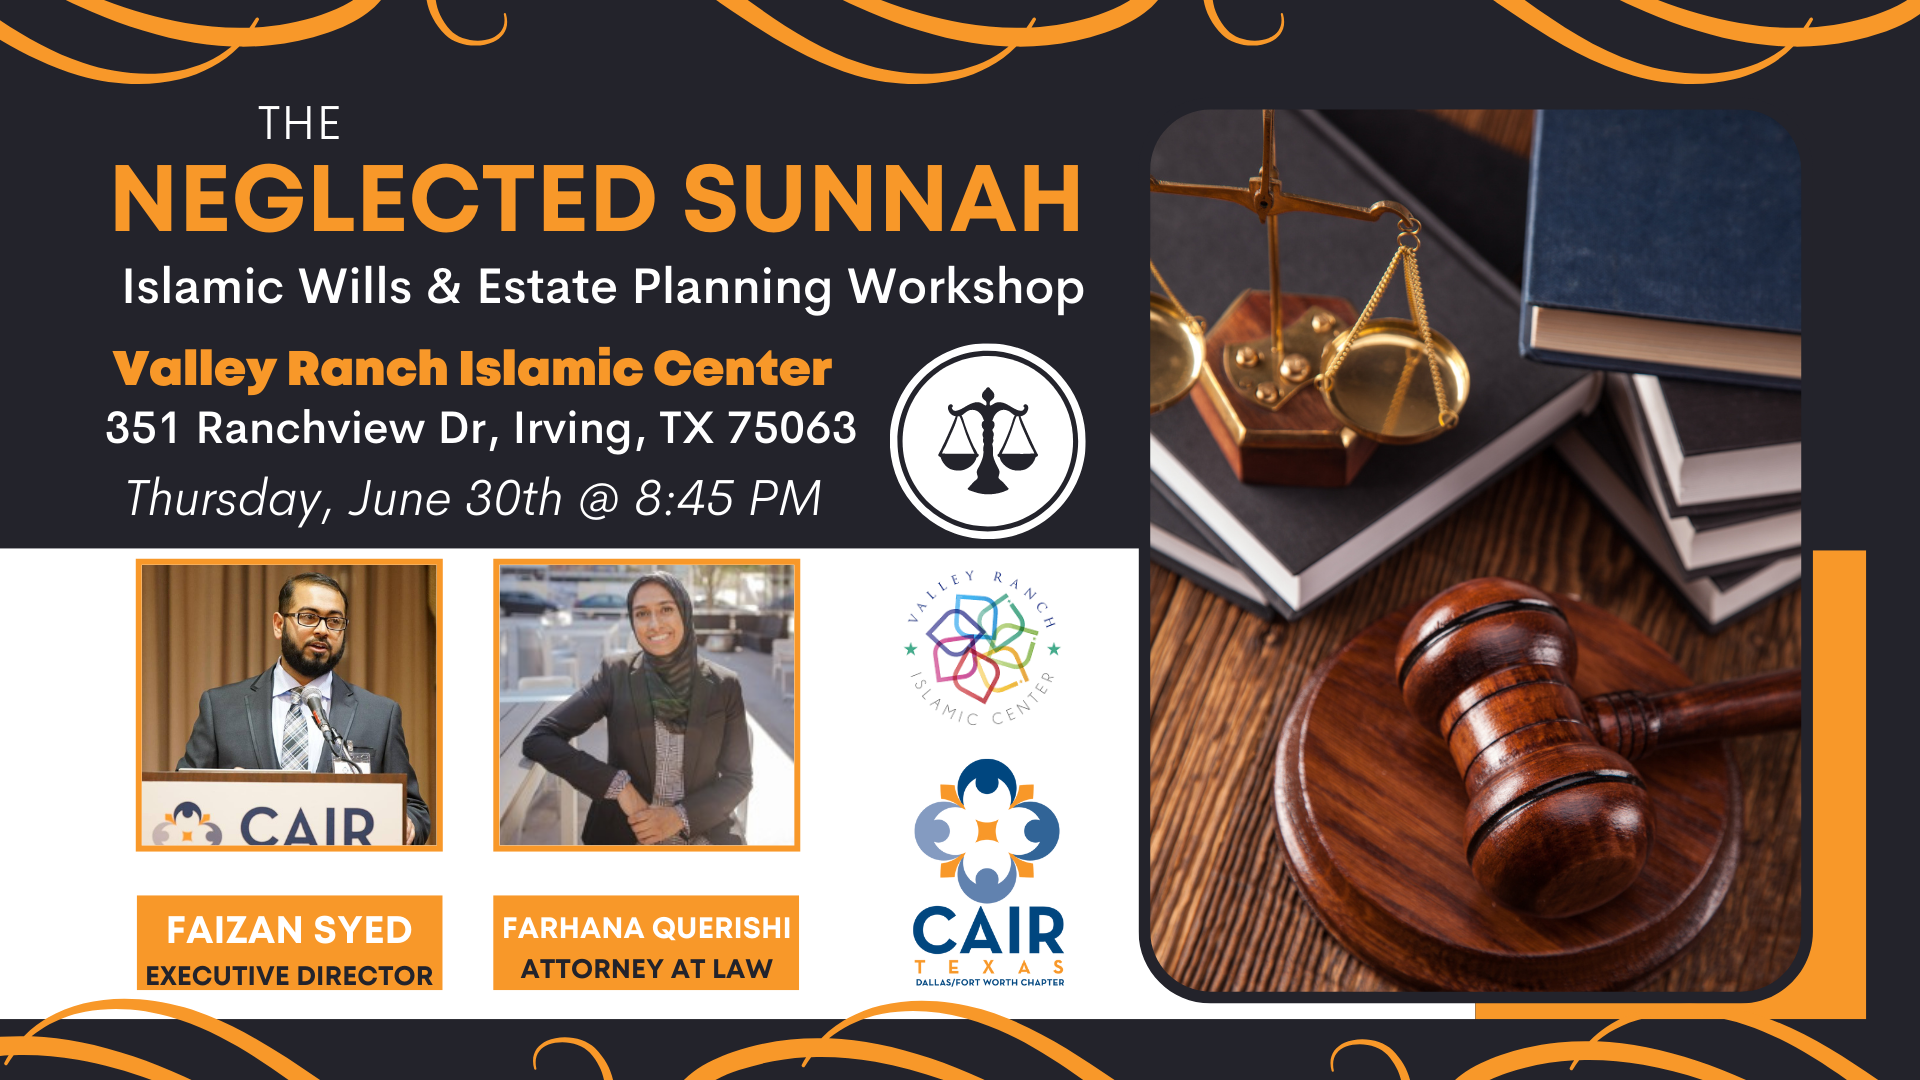 The Neglected Sunnah: Islamic Wills Workshop at Valley Ranch Islamic Center